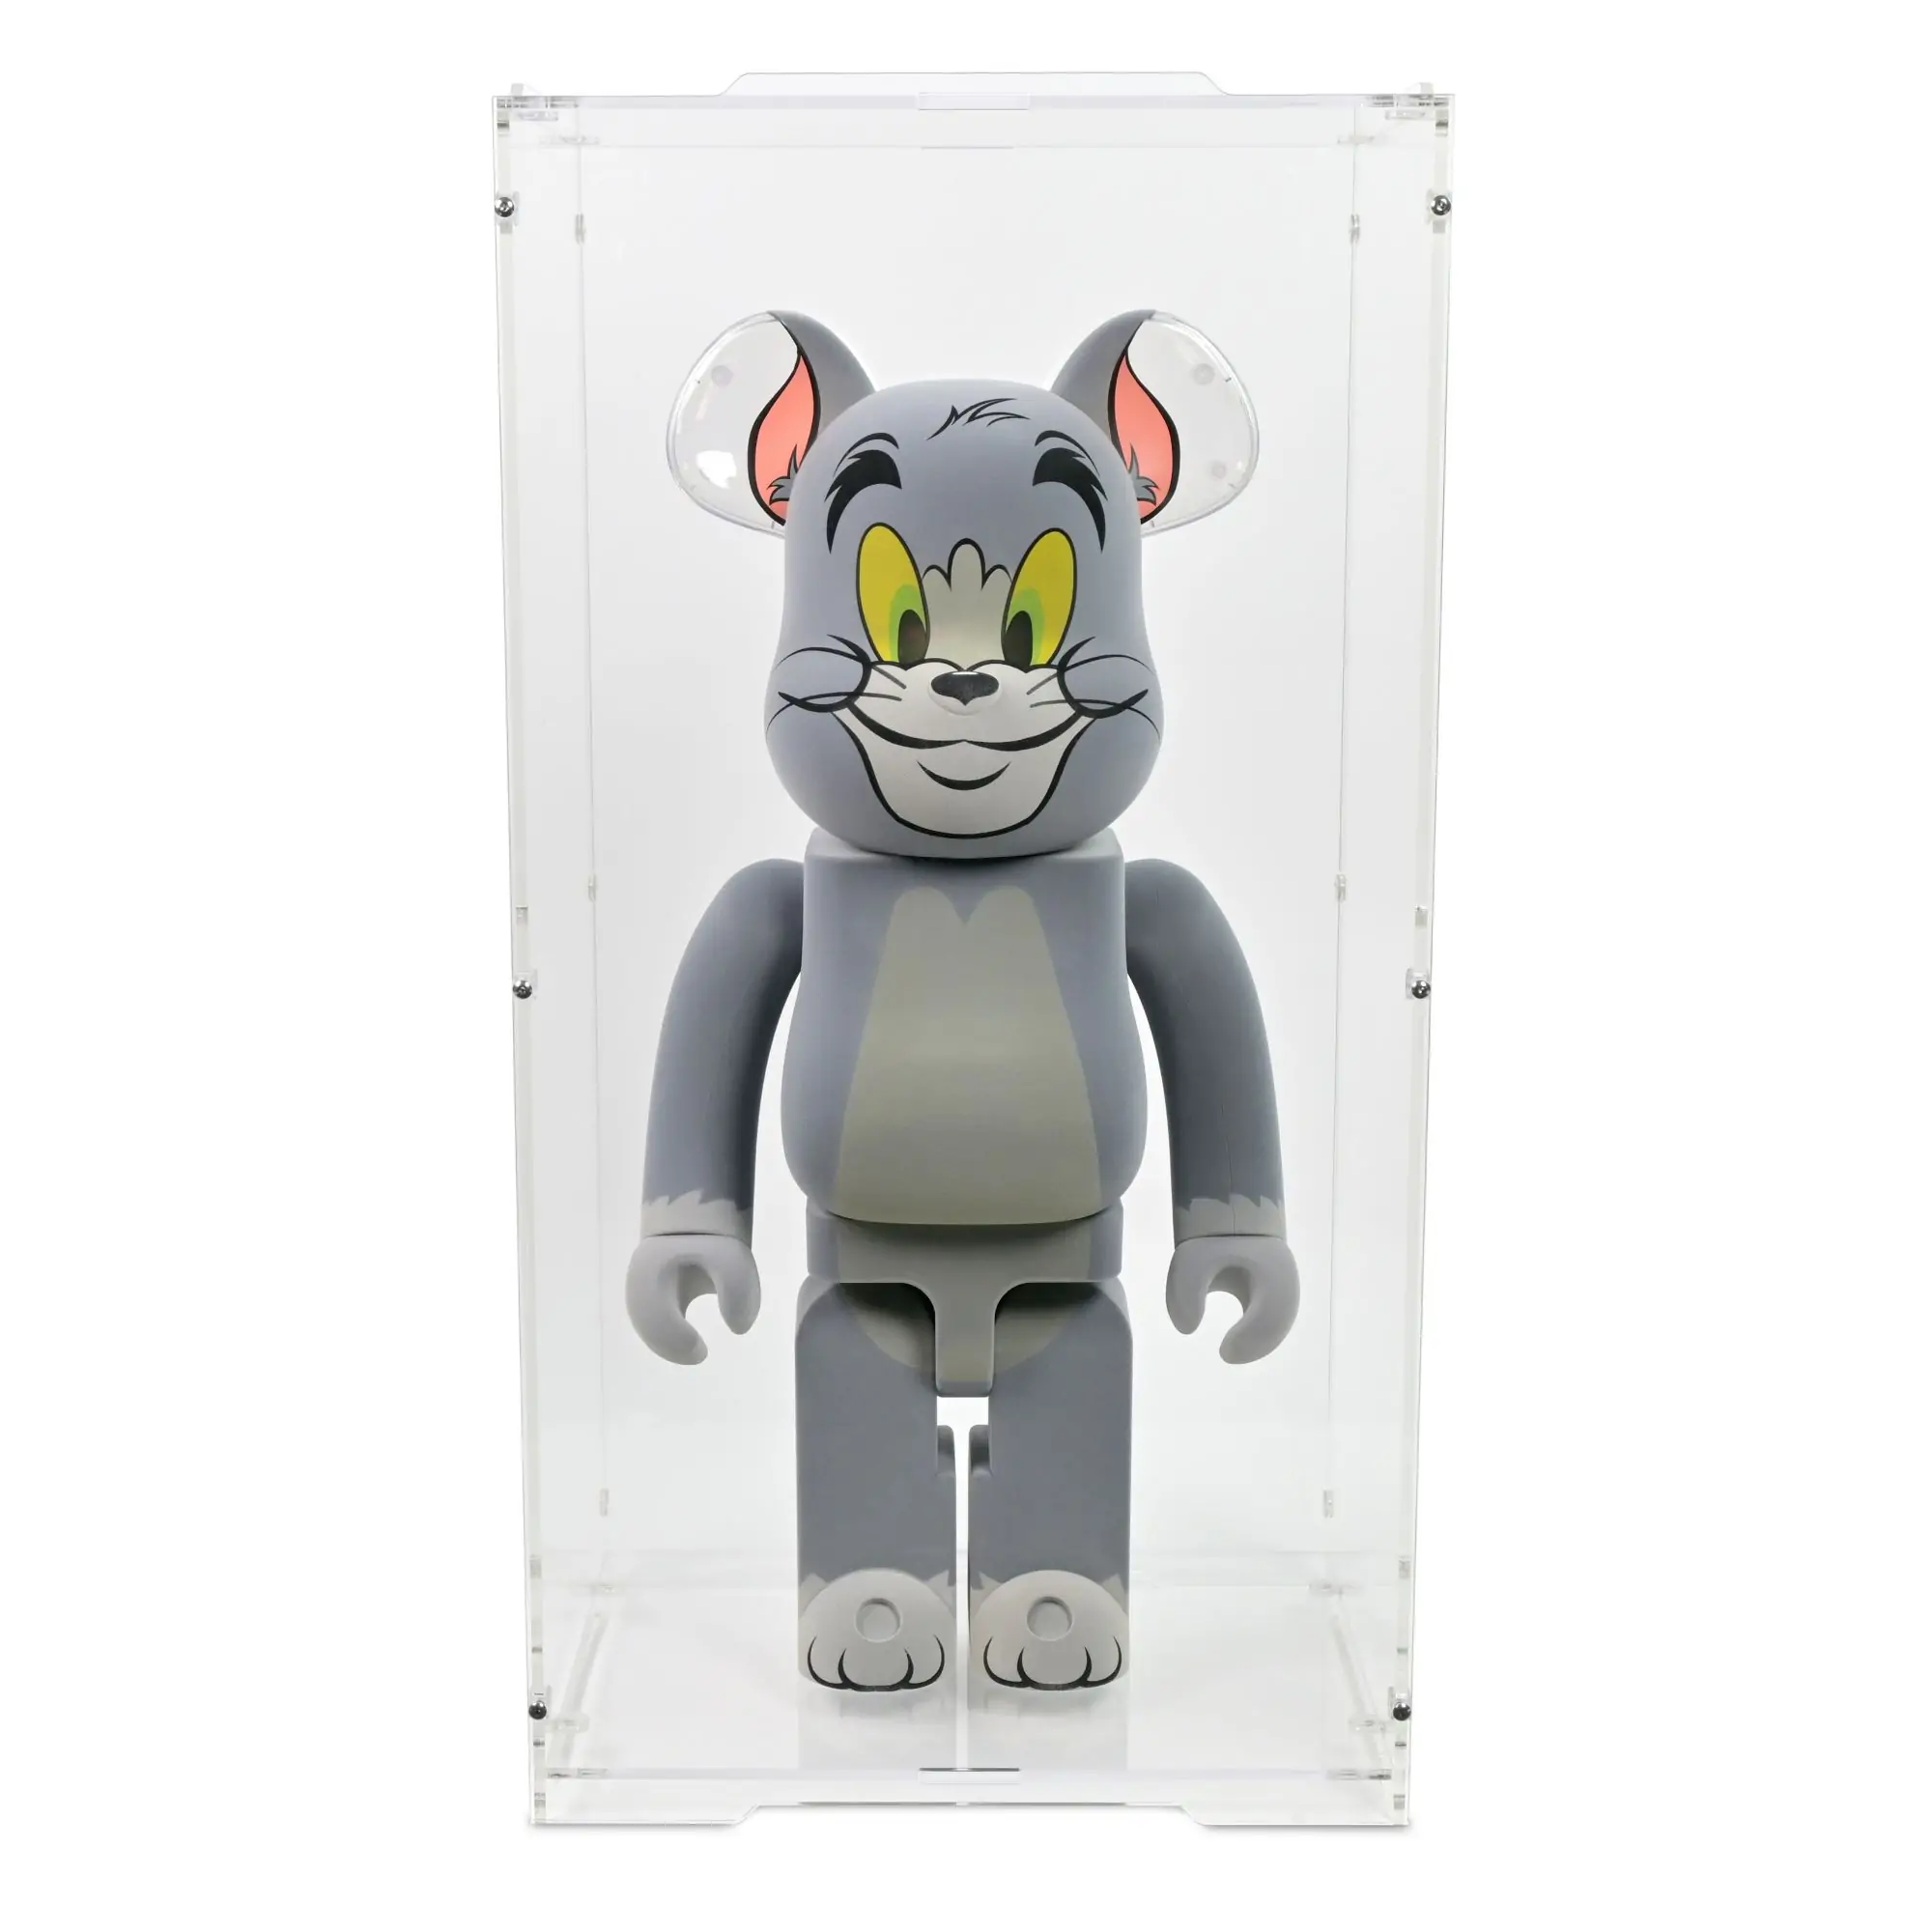 Is this a real bearbrick? The top of the box has a logo on it but